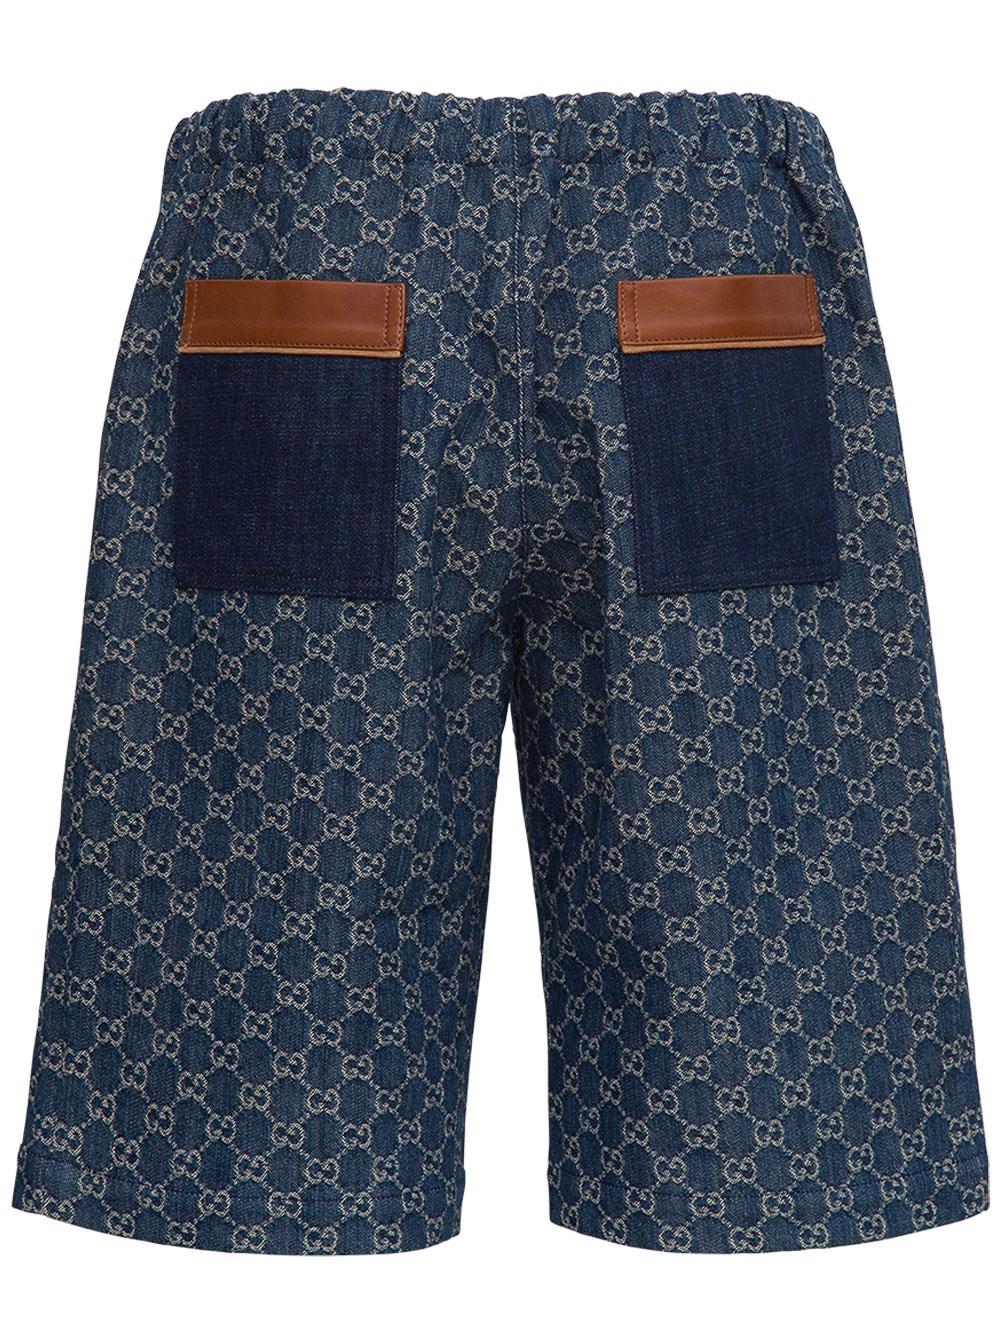 Gucci Cotton Eco Washed GG Denim Shorts in Blue for Men - Lyst